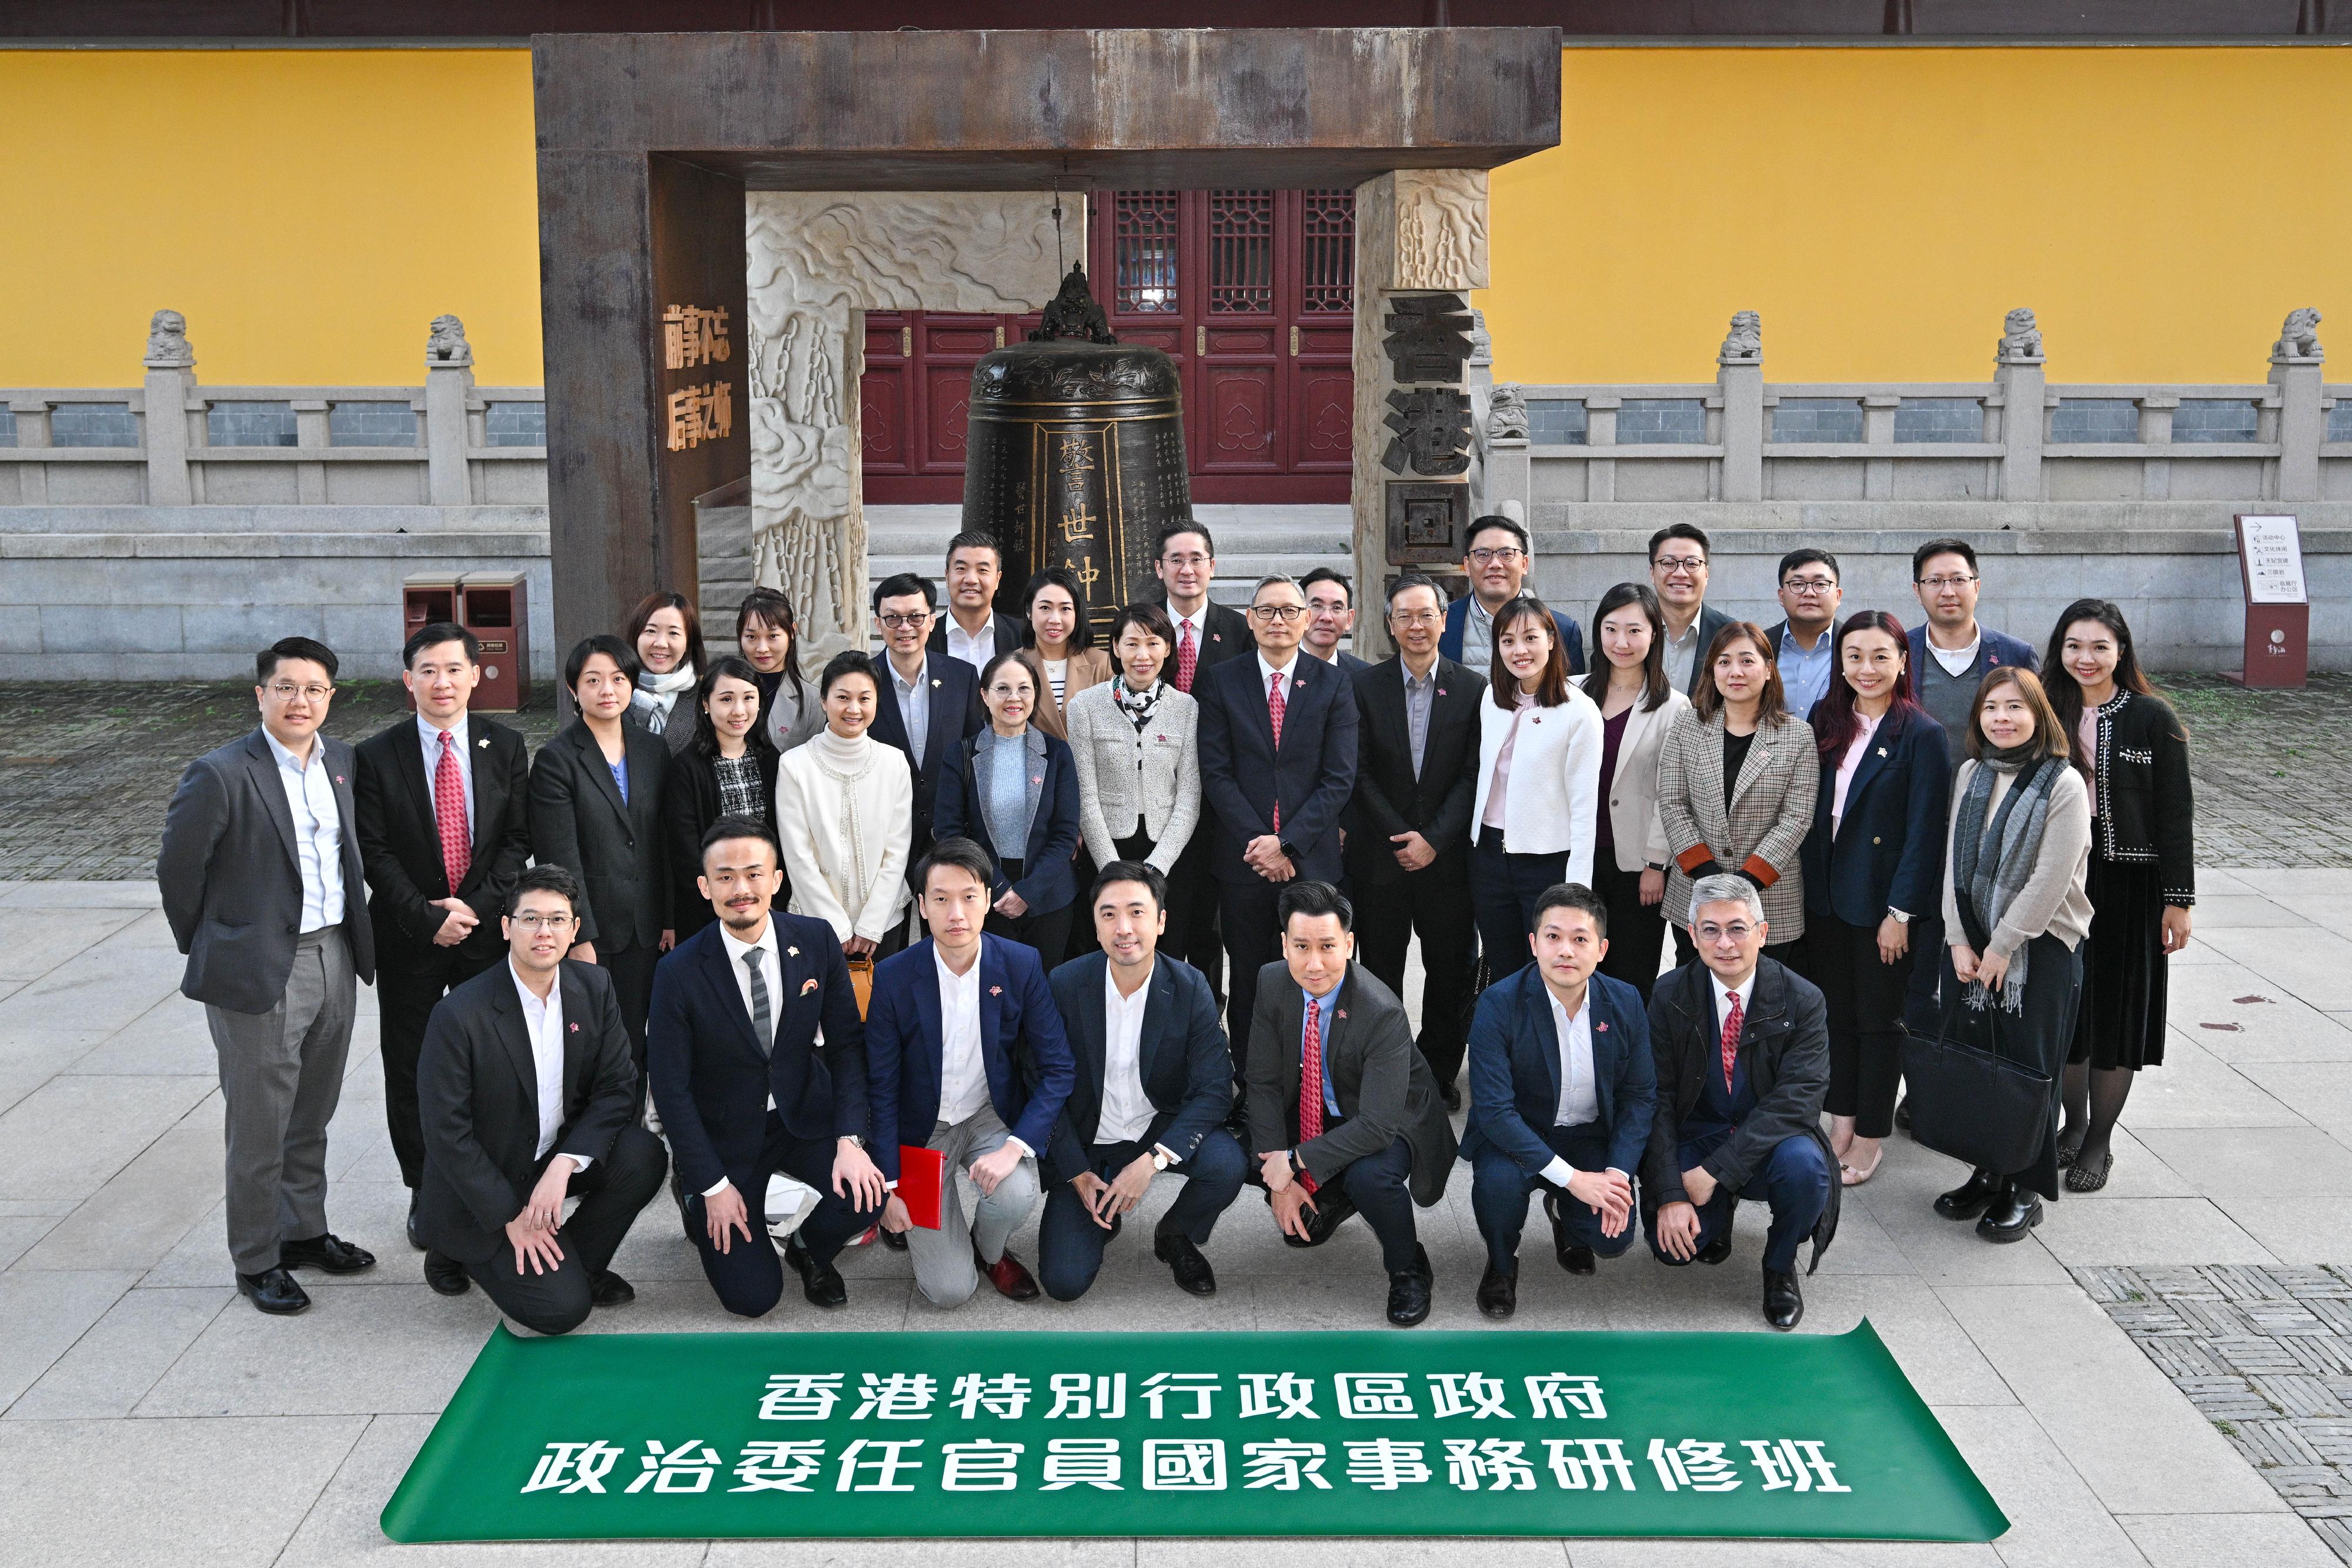 The delegation of politically appointed officials on a national studies programme and duty visit led by the Director of the Chief Executive's Office, Ms Carol Yip (second row, seventh left), visited the Treaty of Nanking Historical Archives Museum in Nanjing yesterday (November 23).